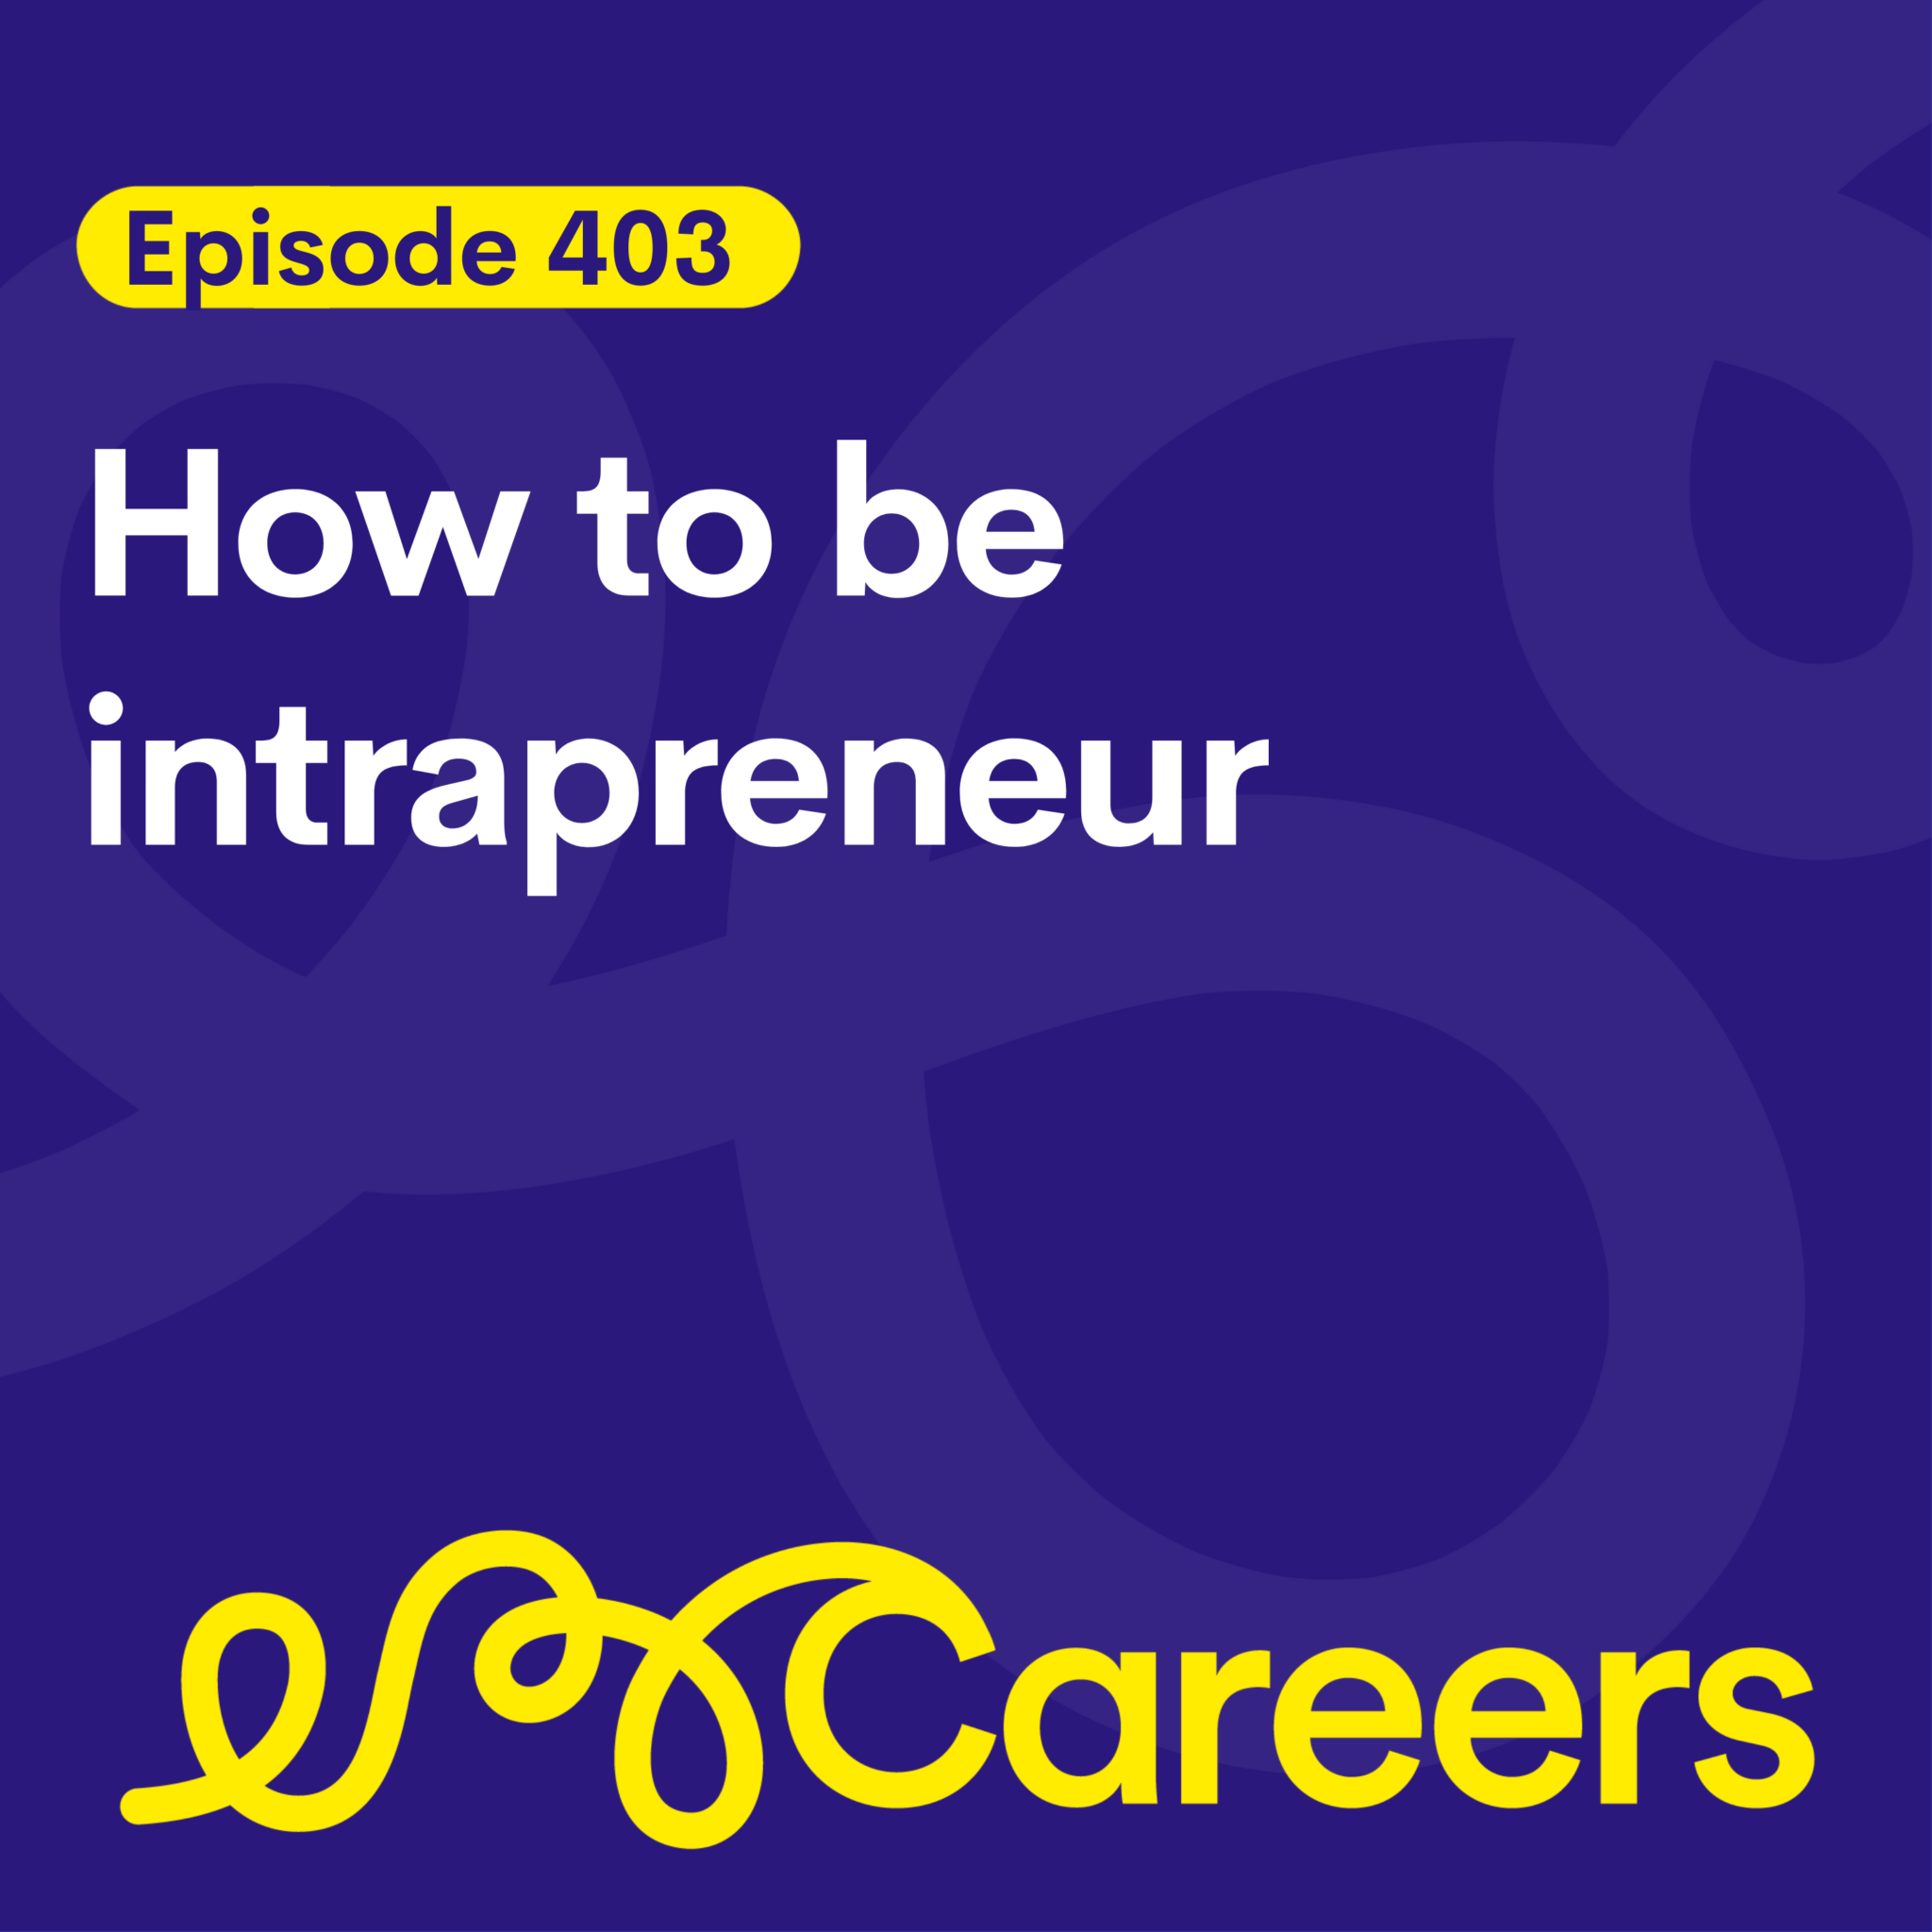 The right way to be an intrapreneur